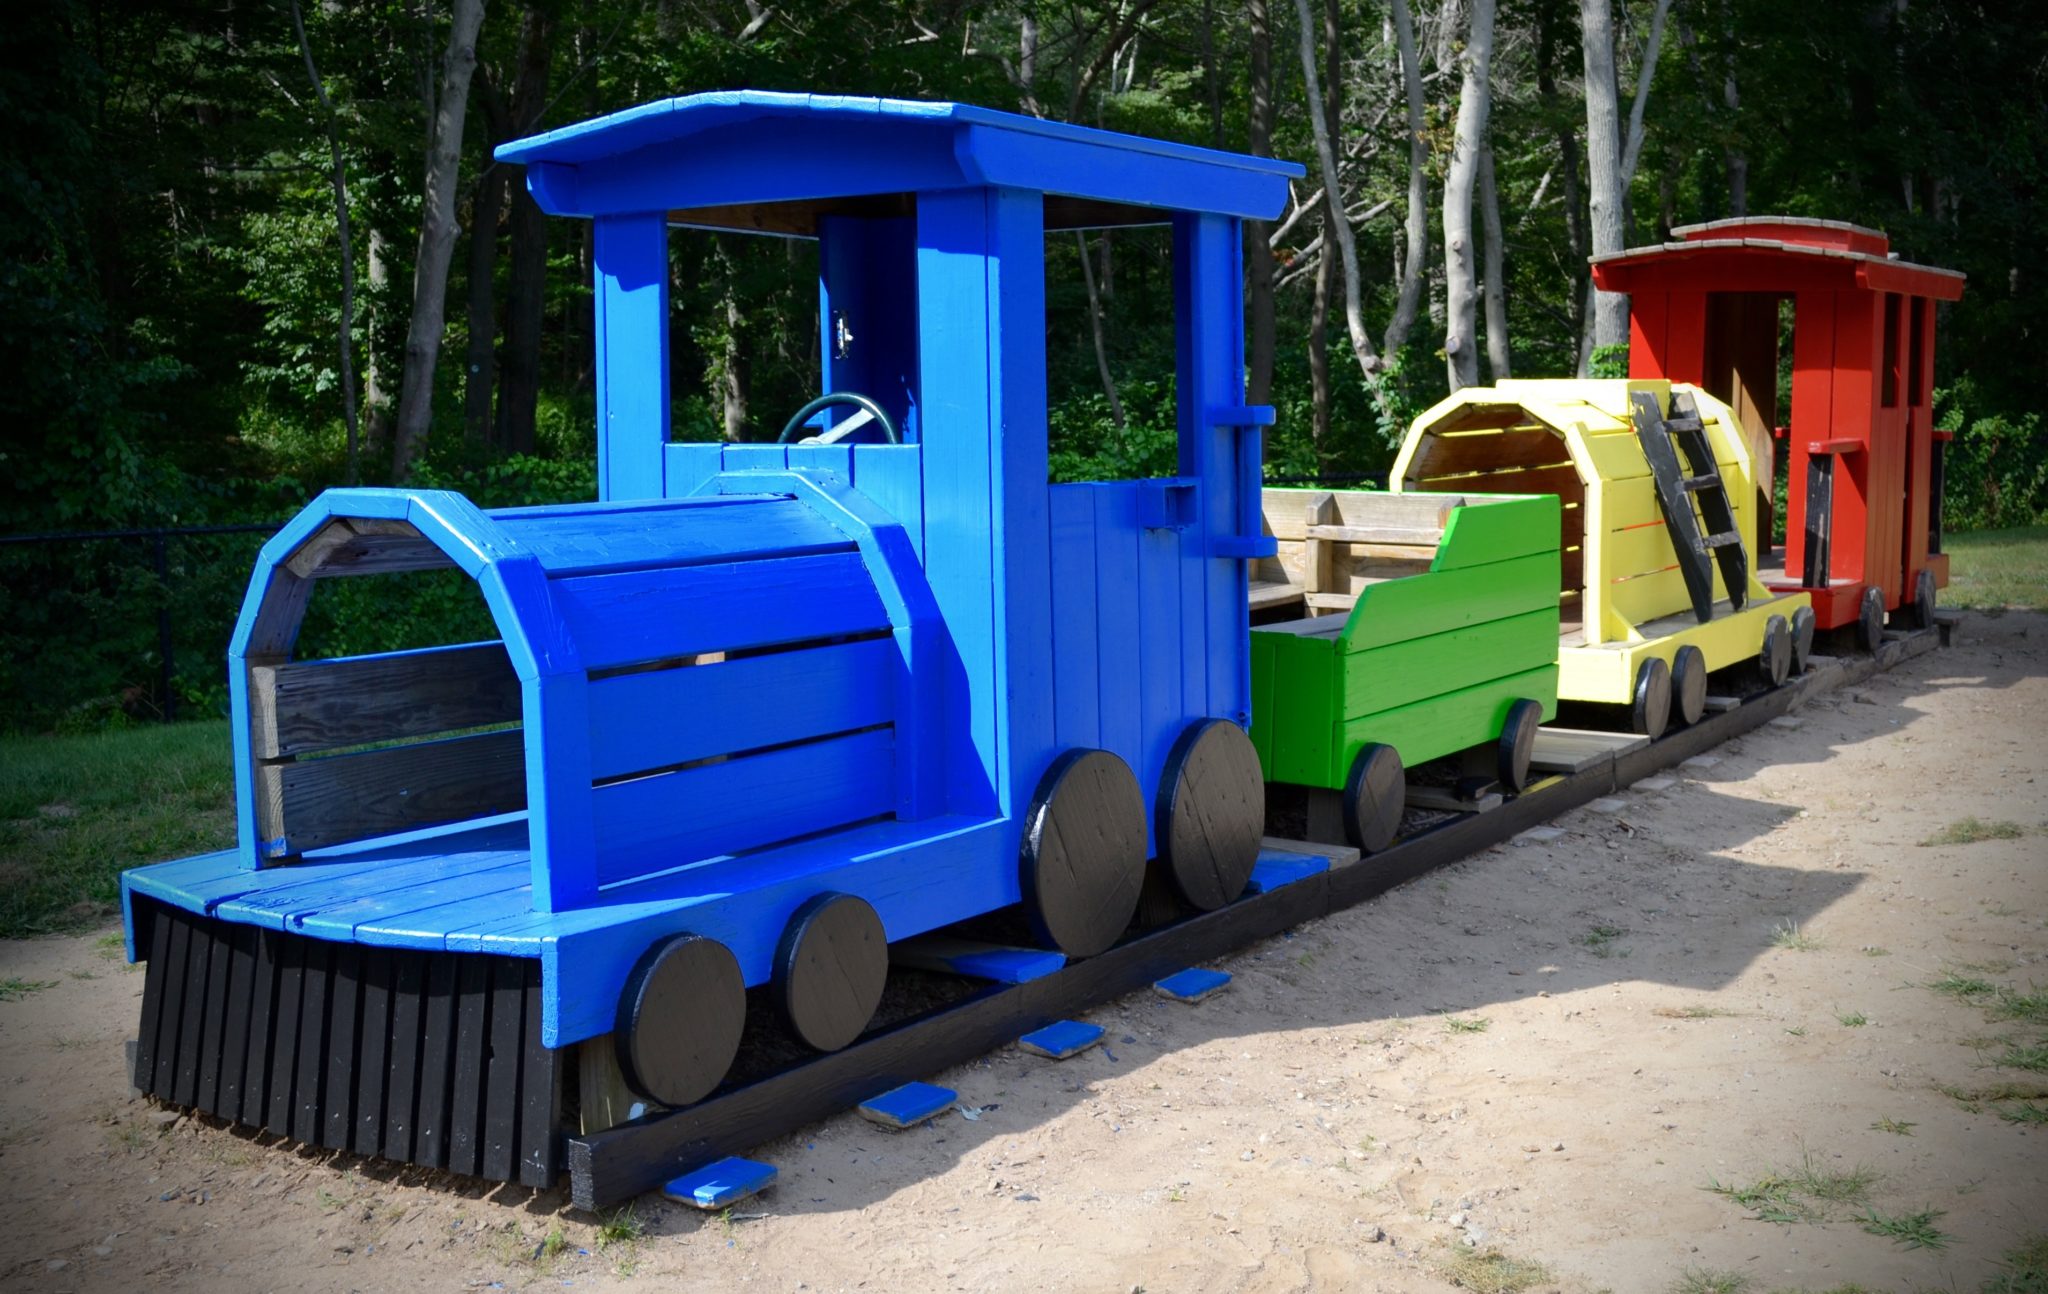 Wooden painted train that sits in Stanley school yard